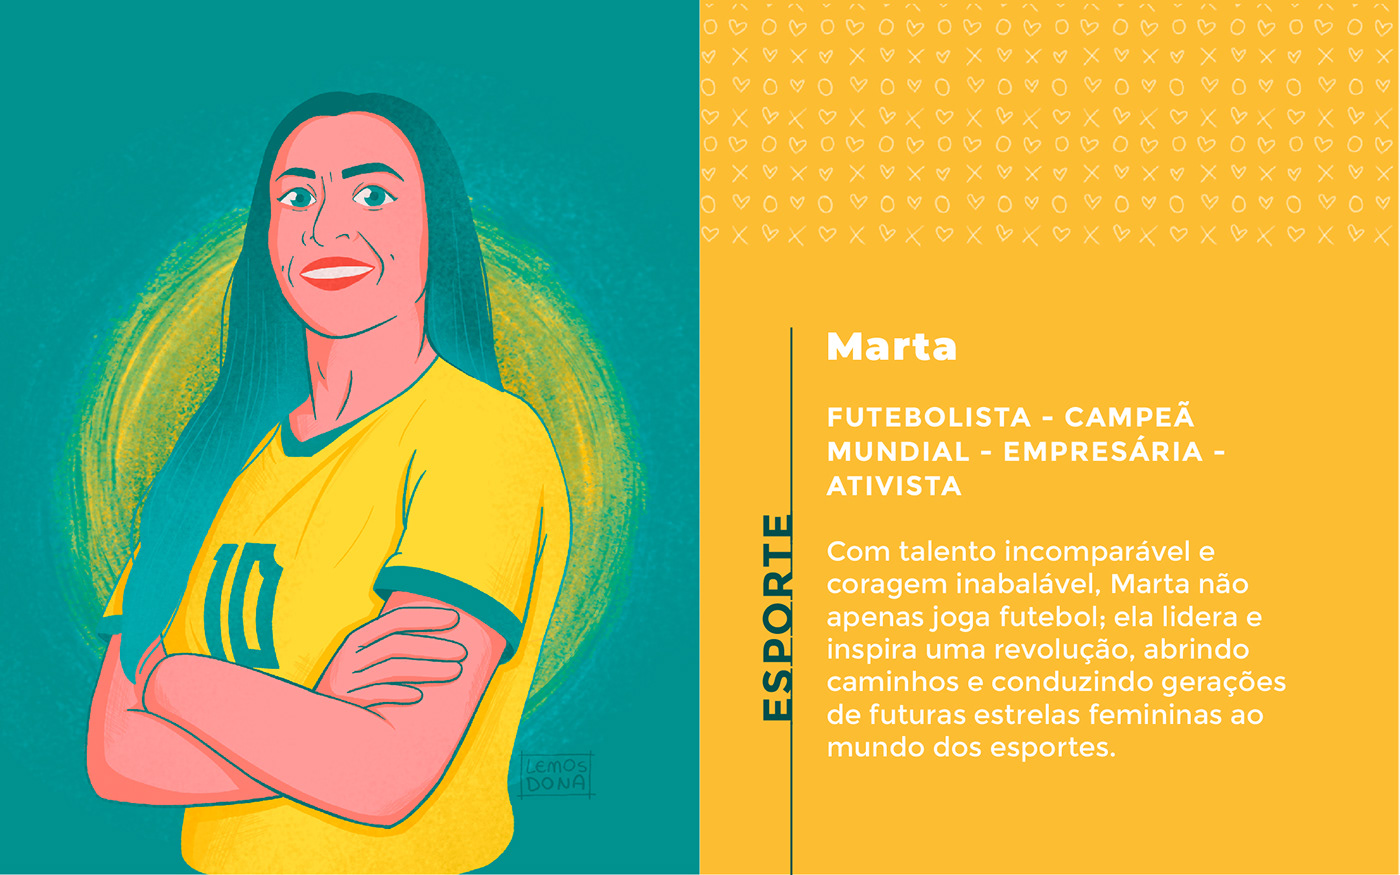 An illustrated portrait of Marta, a Brazilian famous soccer player